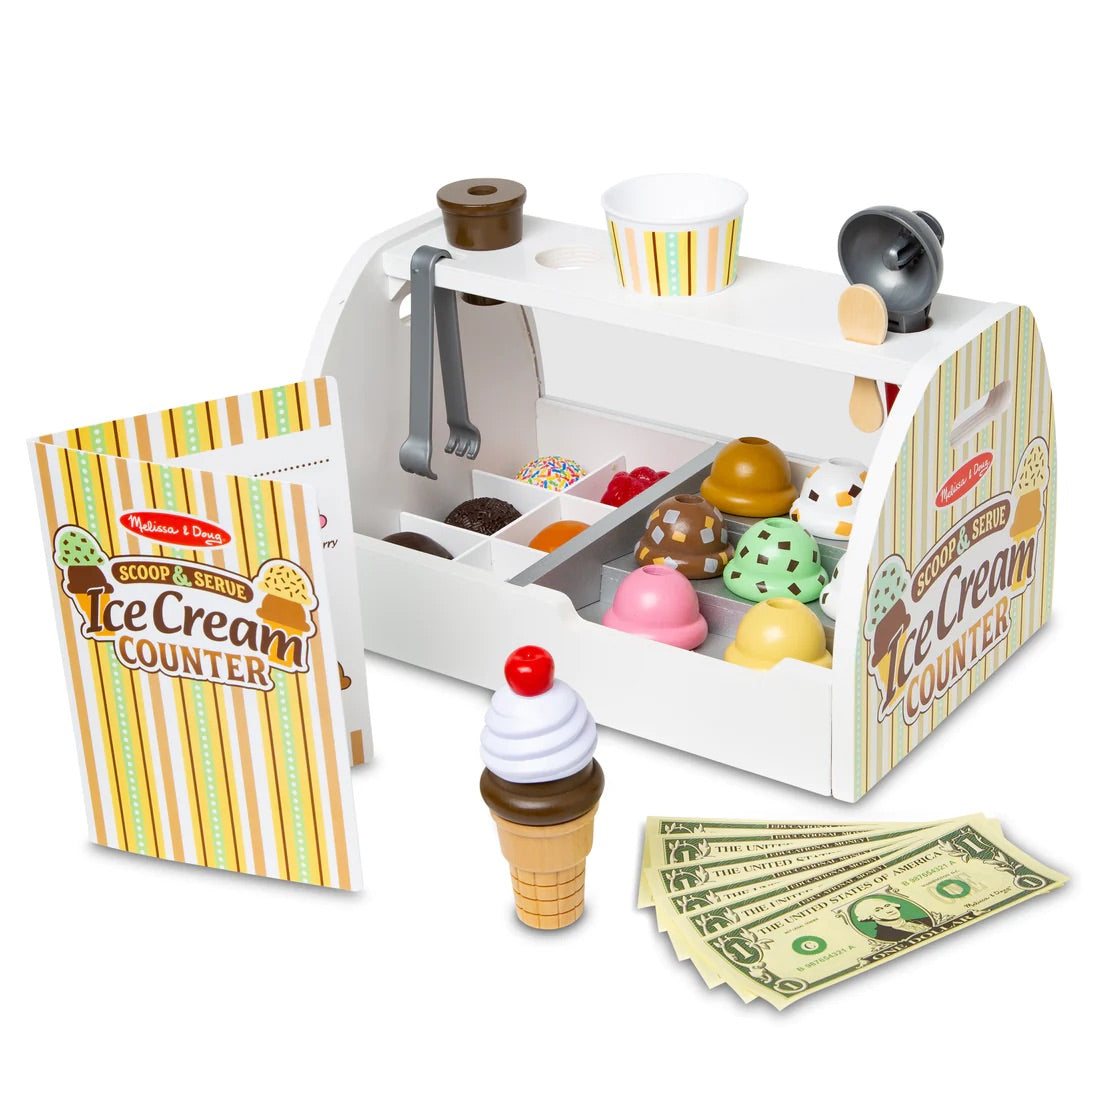 Scoop and Serve Ice Cream Counter by Melissa & Doug #9286